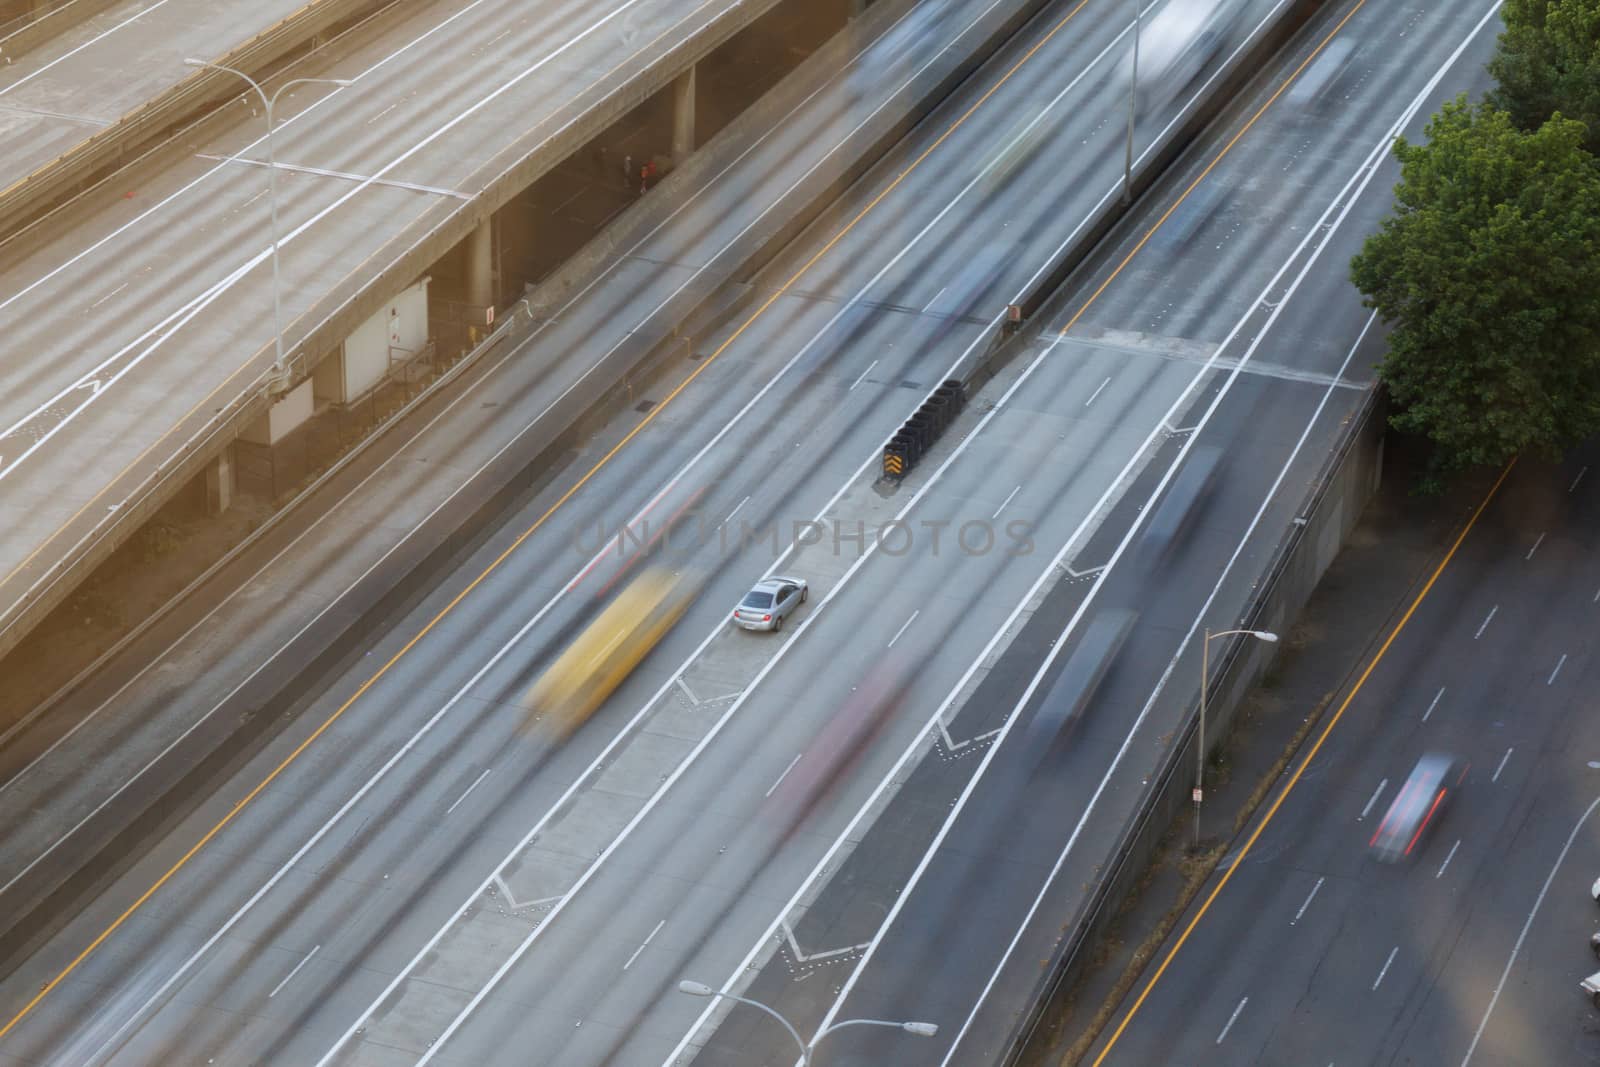 Motion Blur on freeway with one disabled car